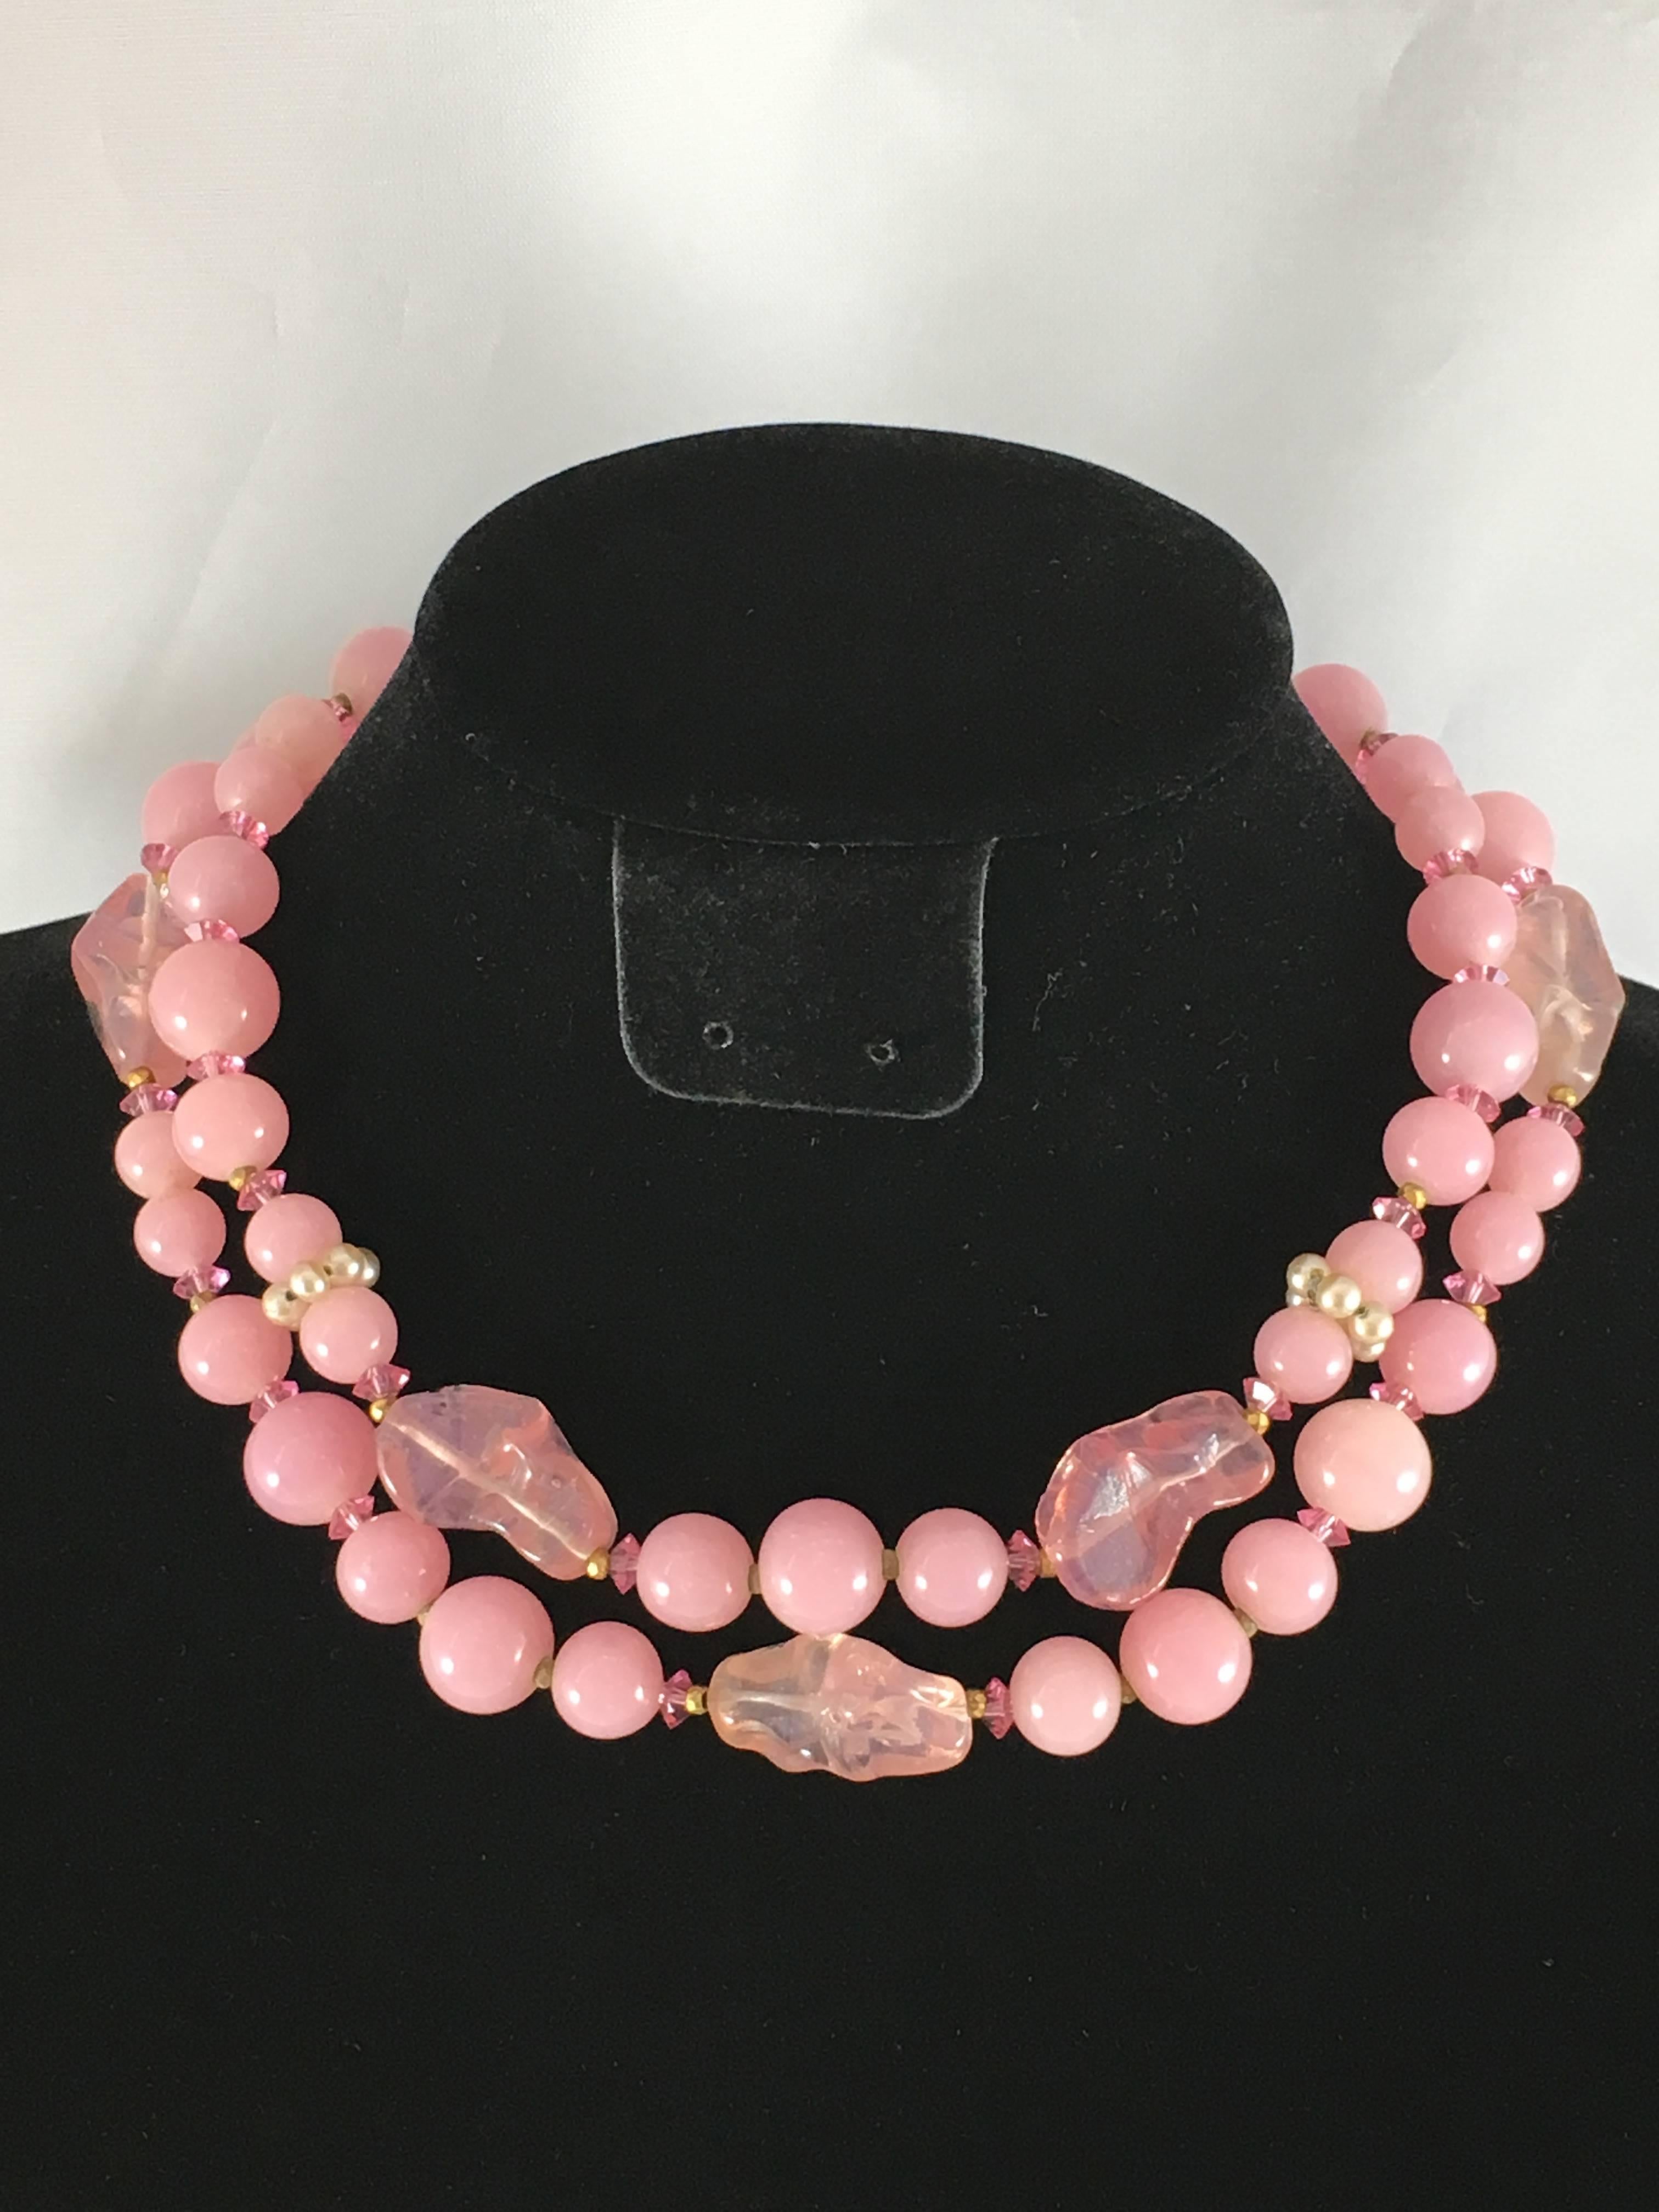 This is a beautiful 1950s two strand pink glass choker necklace made by Miriam Haskell. It features light pink glass beads, faceted dark pink glass beads and faux seed pearls. It has a flower clasp made up of a pink glass center and faux seed pearl